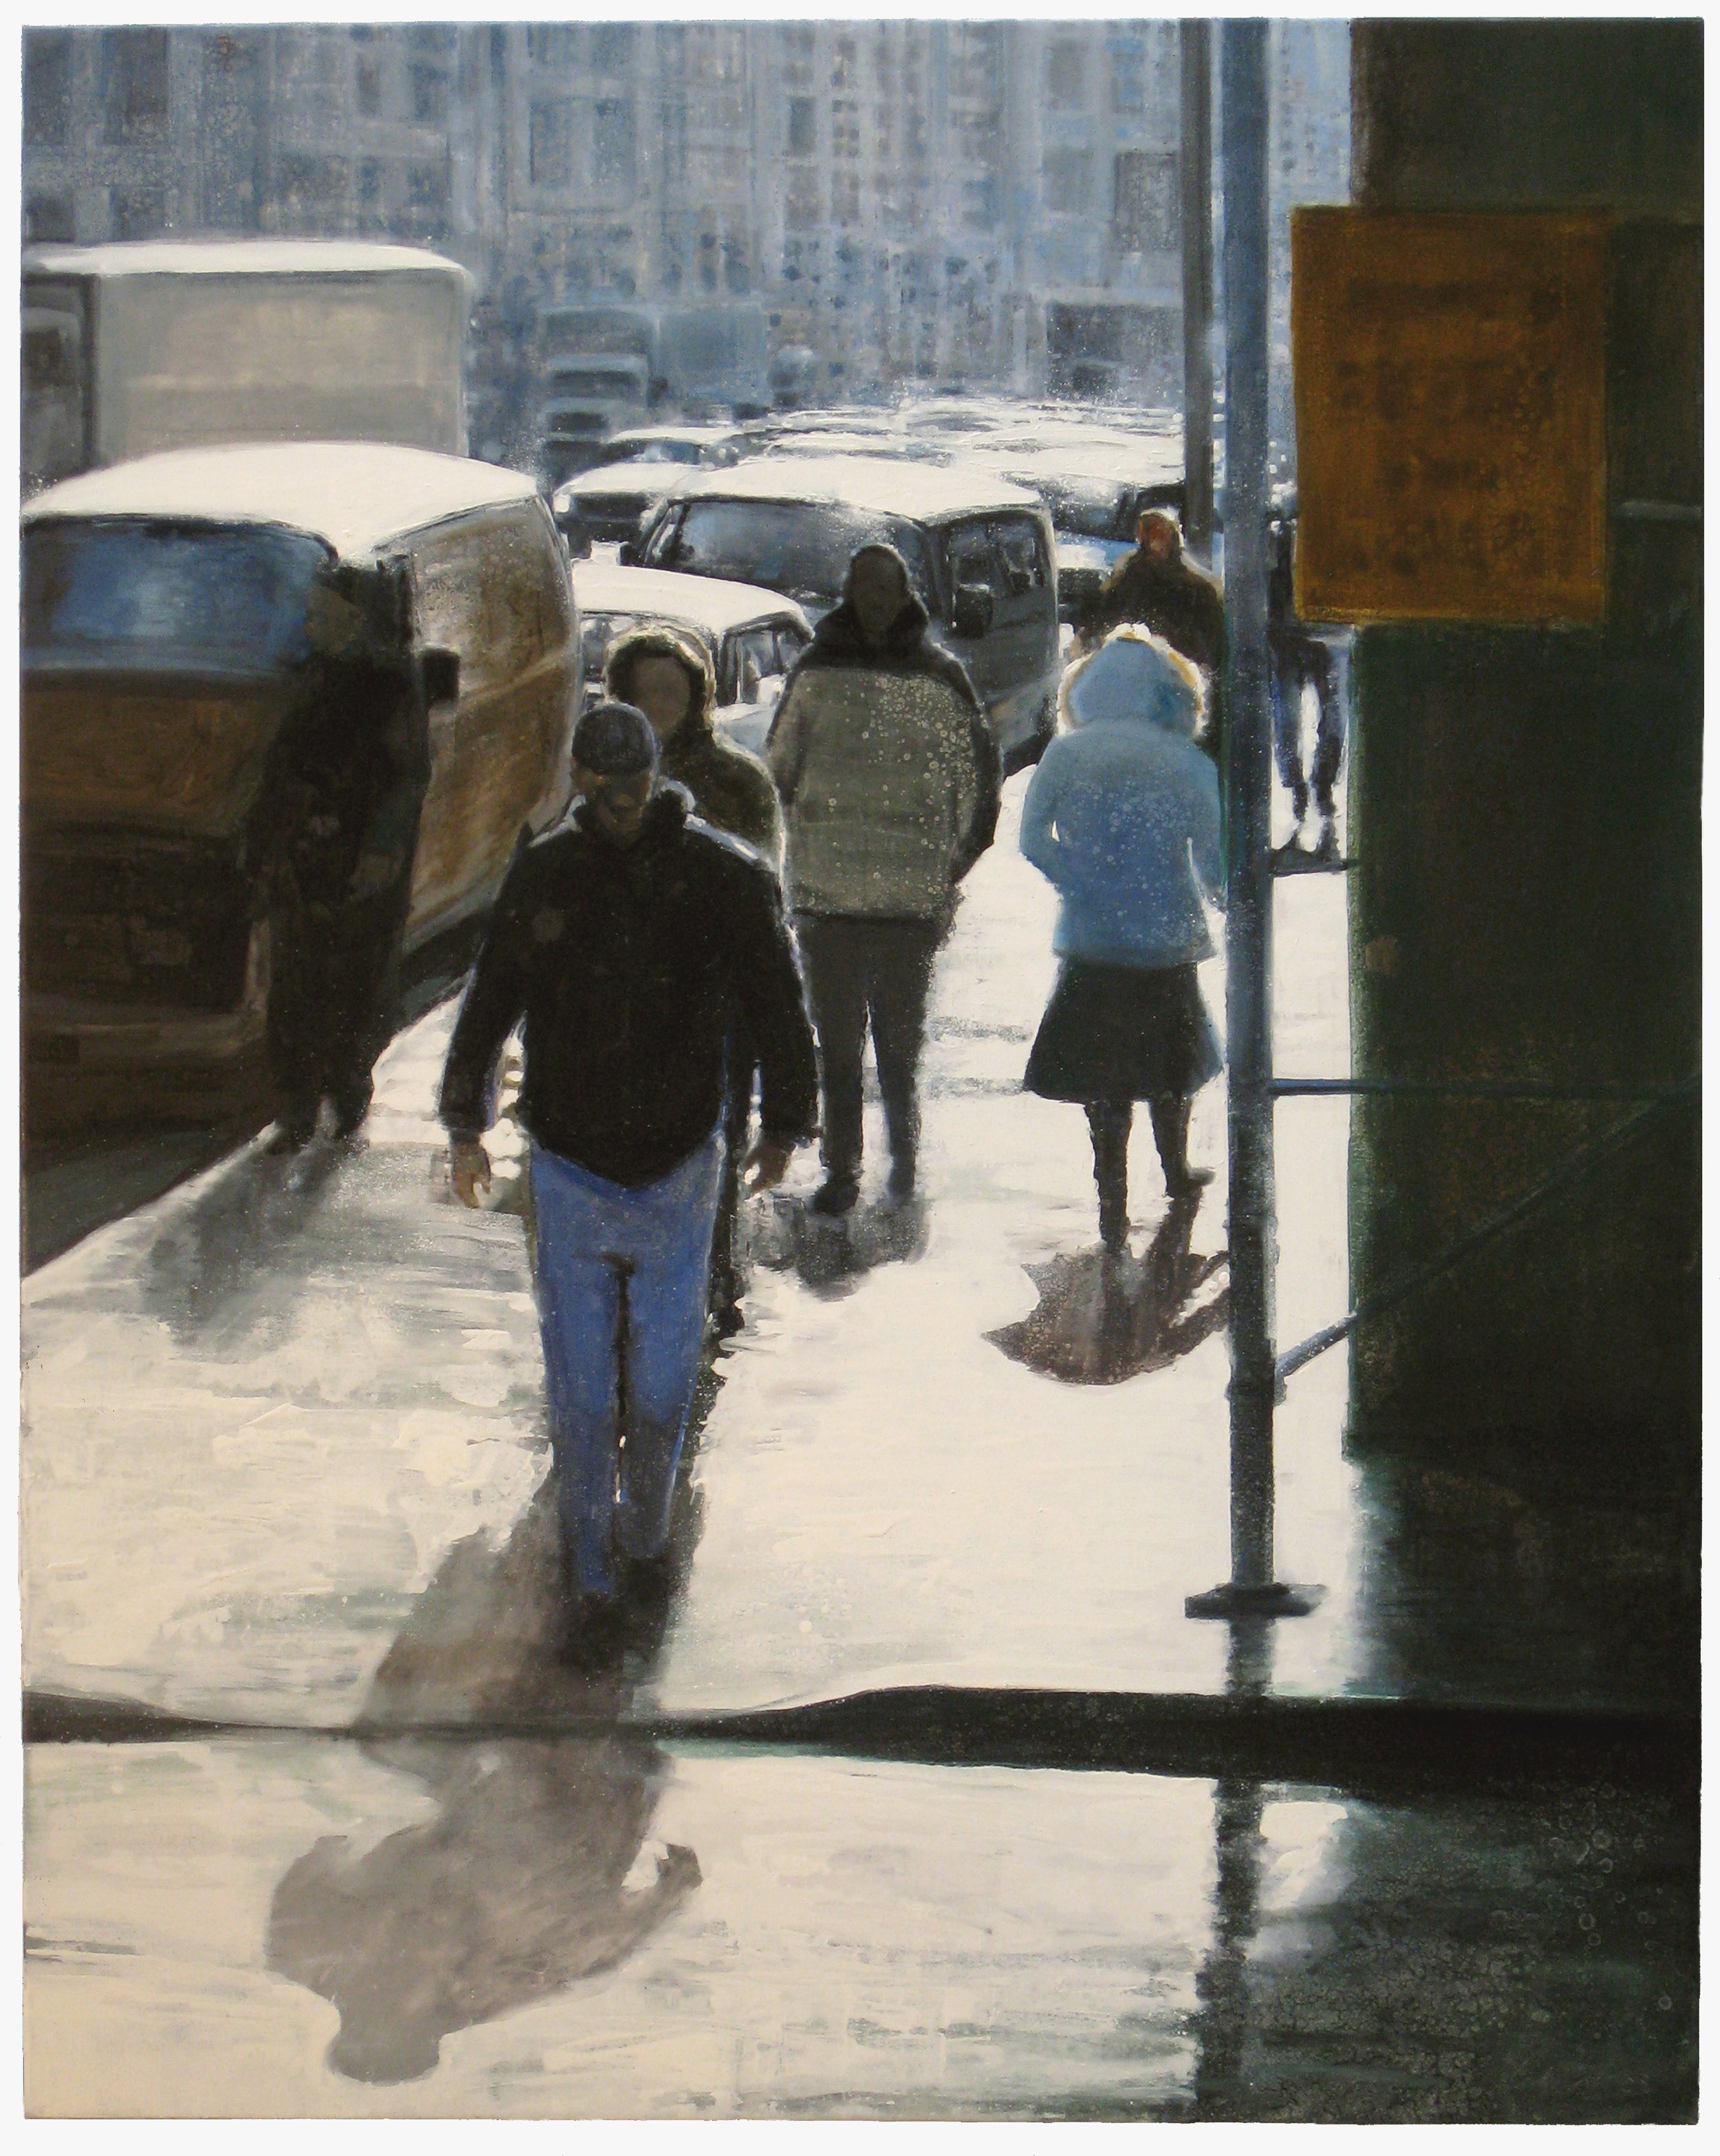  West 39th Street #1 60x48 inches (152x122cm) Oil on linen 2008 